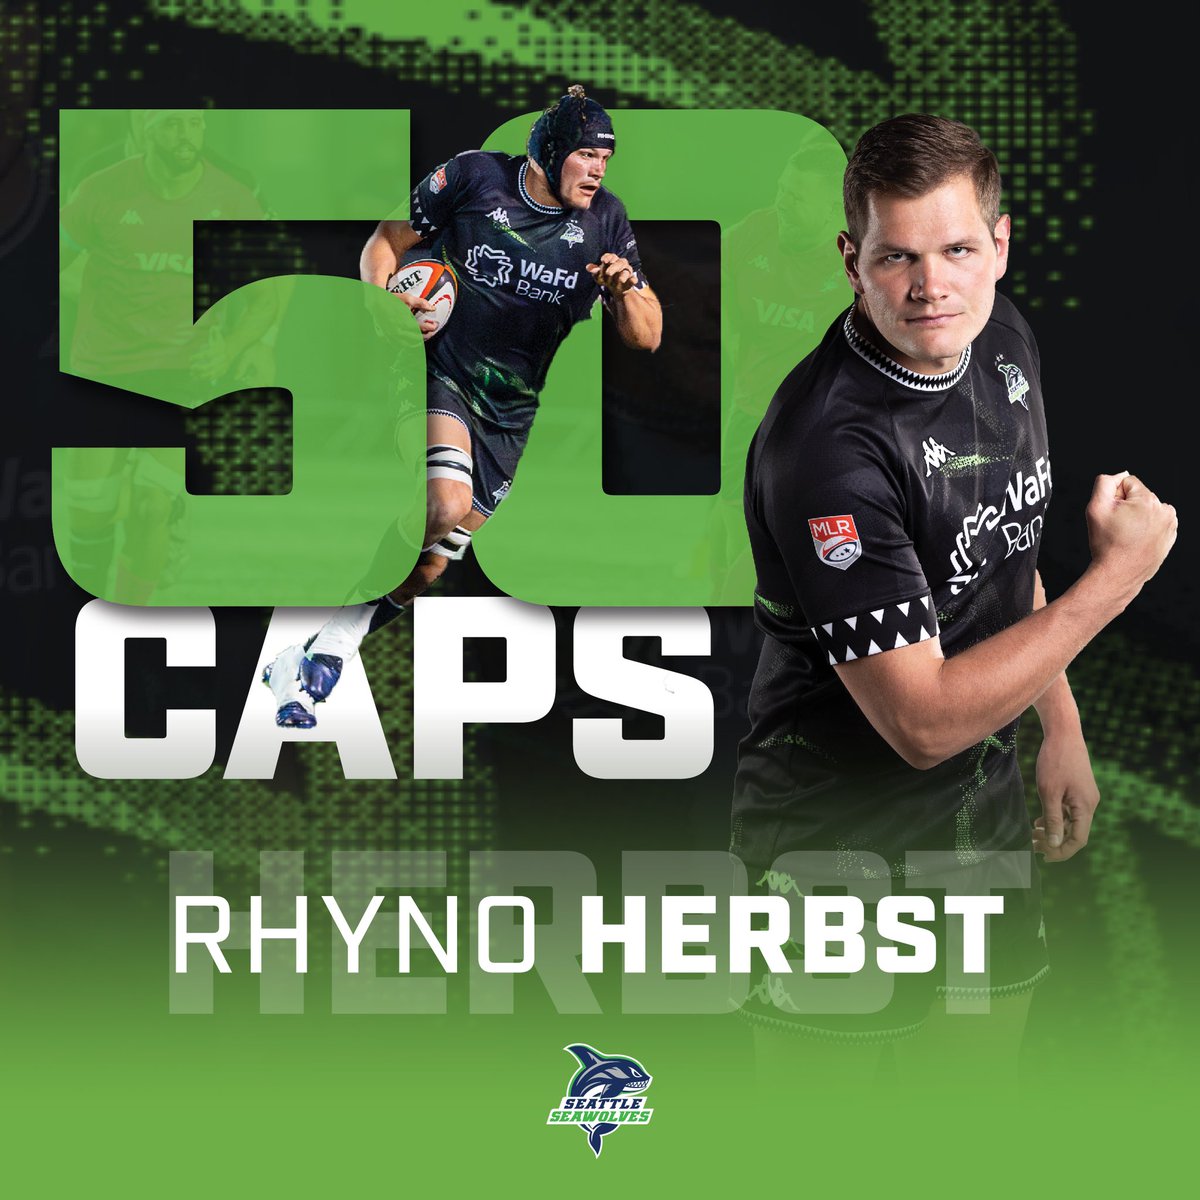 Rhyno Herbst celebrates 50 MLR Caps! 🏆 With 657:06 min on the pitch this season—the 2nd most in USMLR—plus 222m run, 62 tackles, and 4 turnovers, Rhyno’s a true force to be reckoned with. @usmlr | #MLR2024 #TogetherWeHunt #SeattleSeawolves